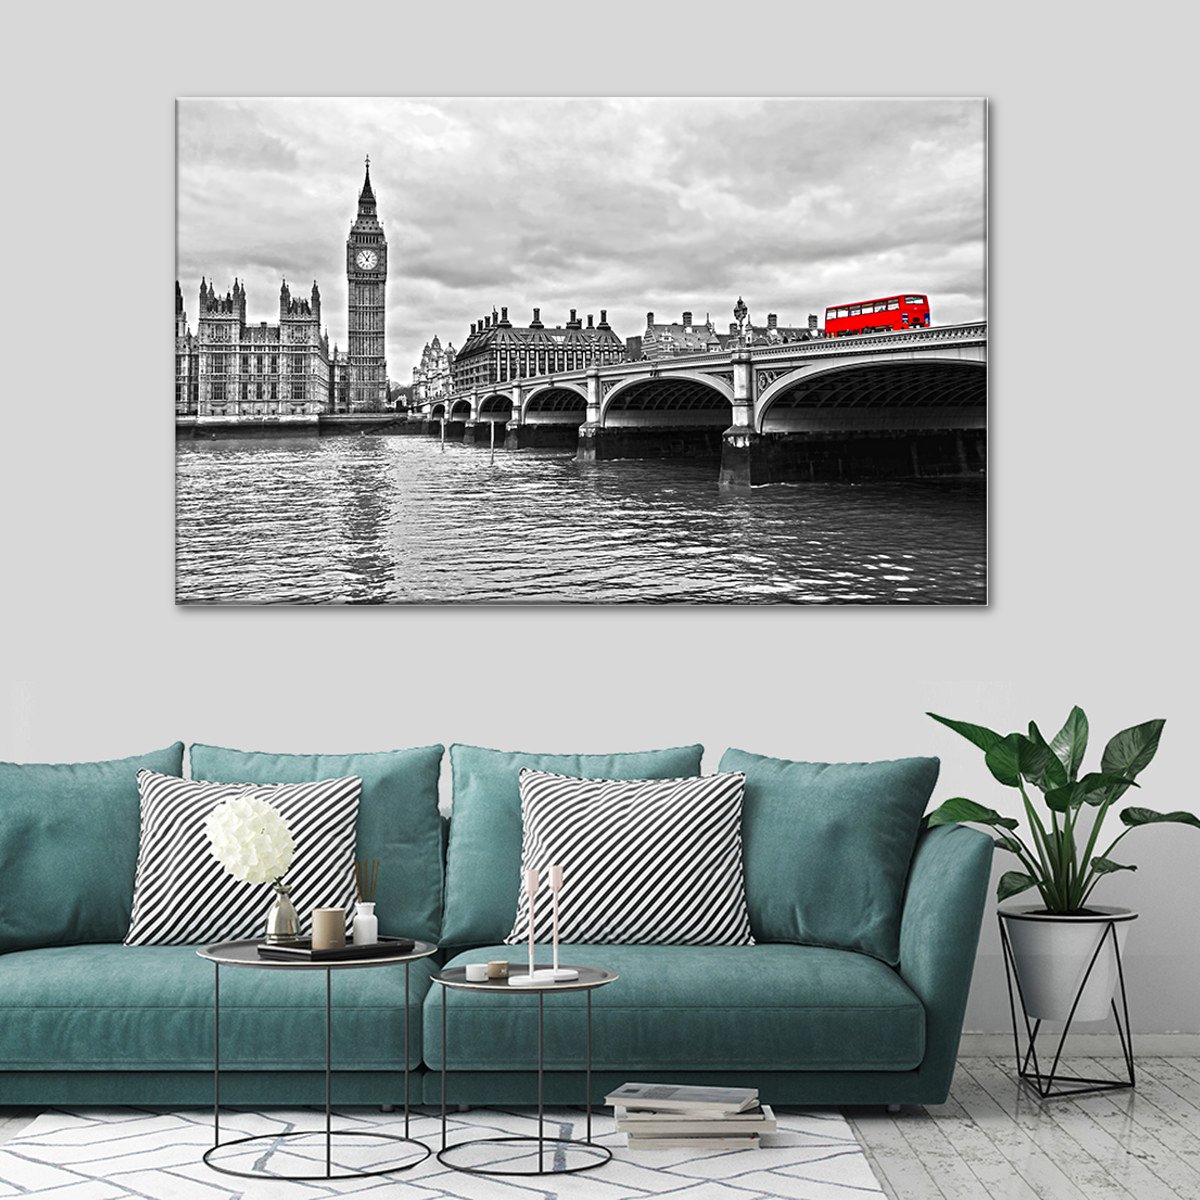 City-Modern-Canvas-London-Scenery-Print-Paintings-Wall-Art-Picture-Decor-Unframed-1426658